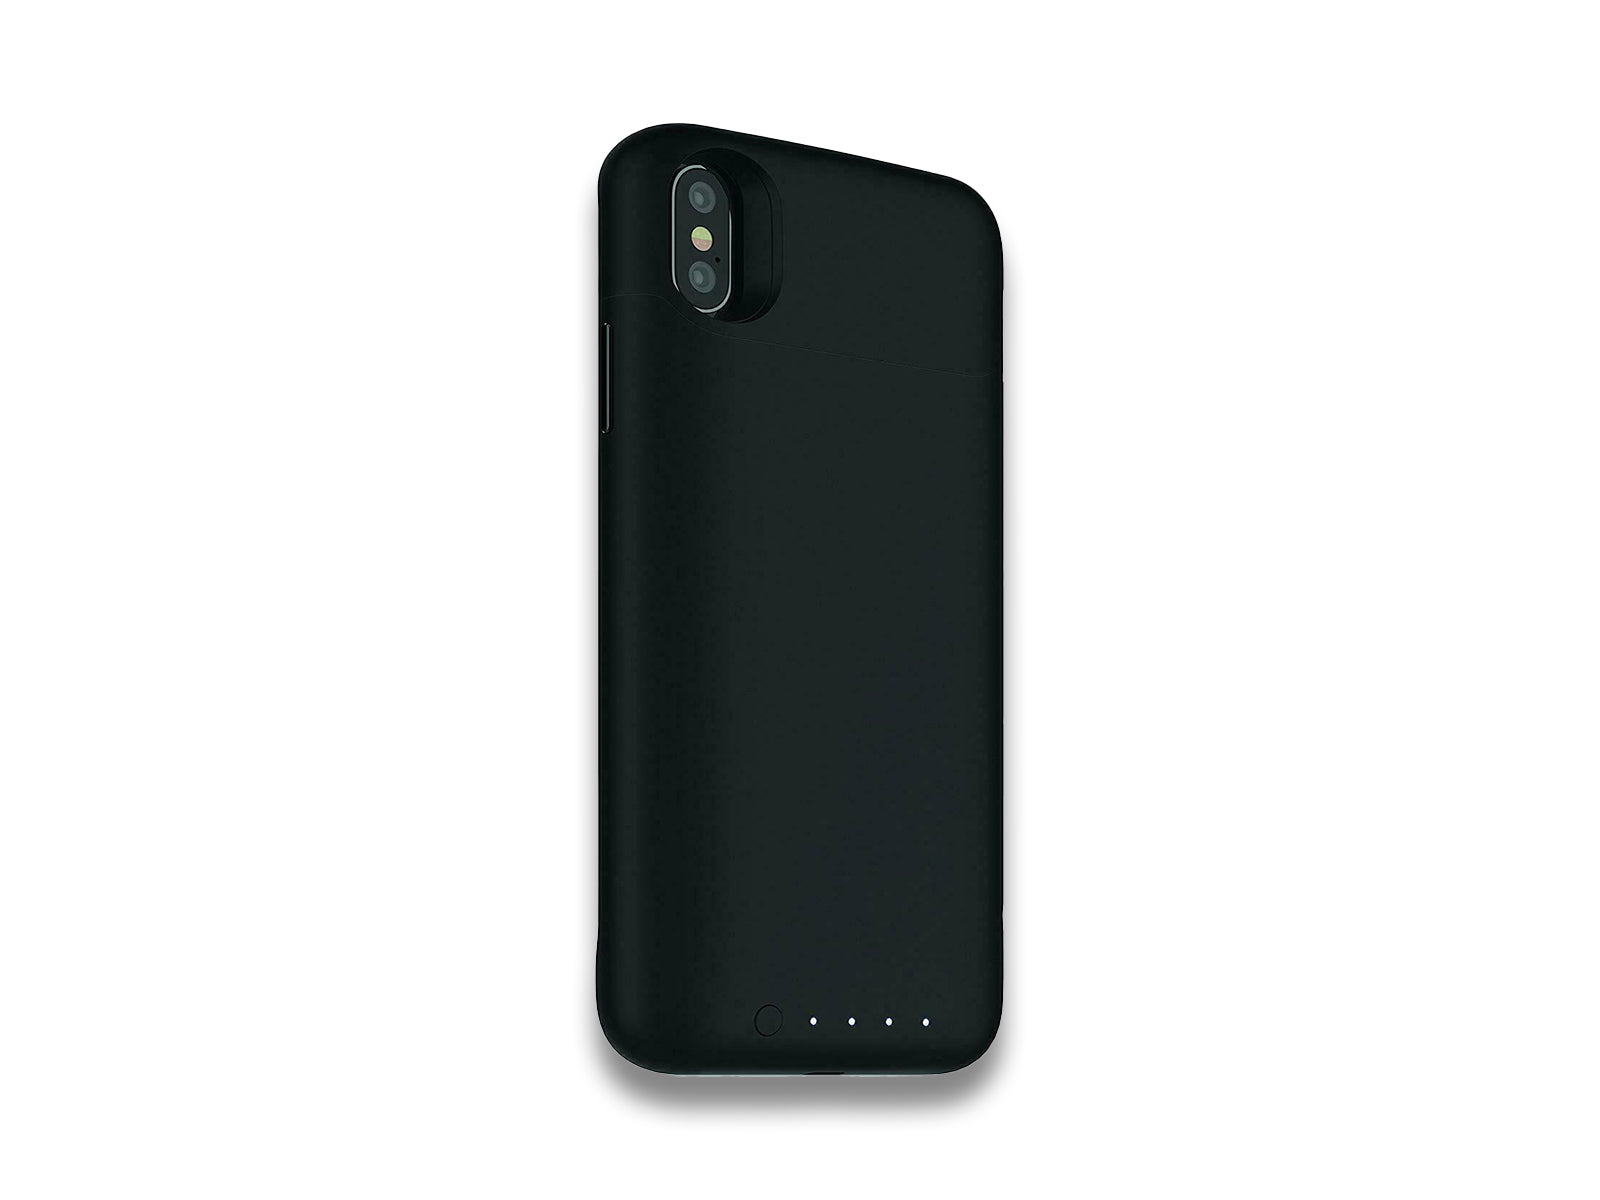 Image shows back view angled of phone case on white background